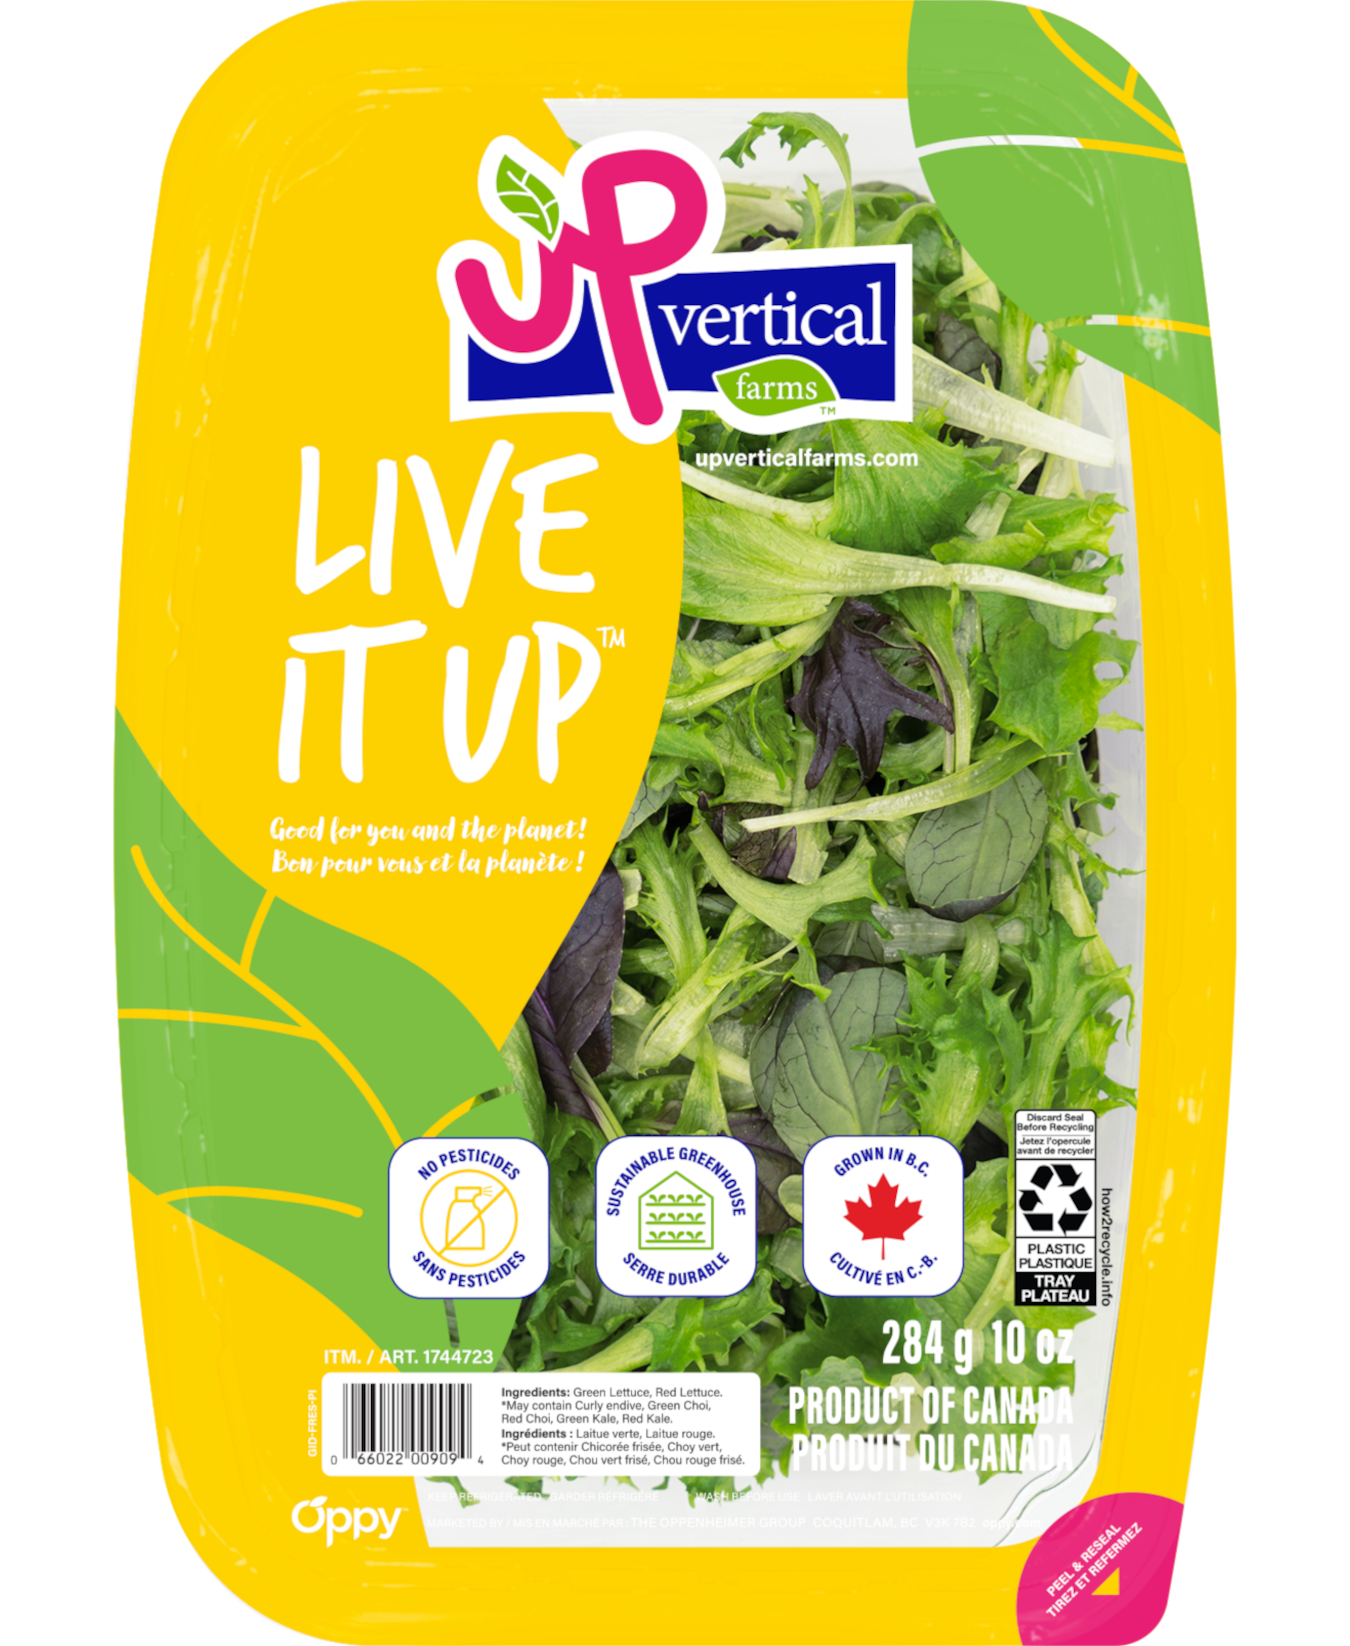 Live It Up salad kit in a clear plastic container with label facing the user